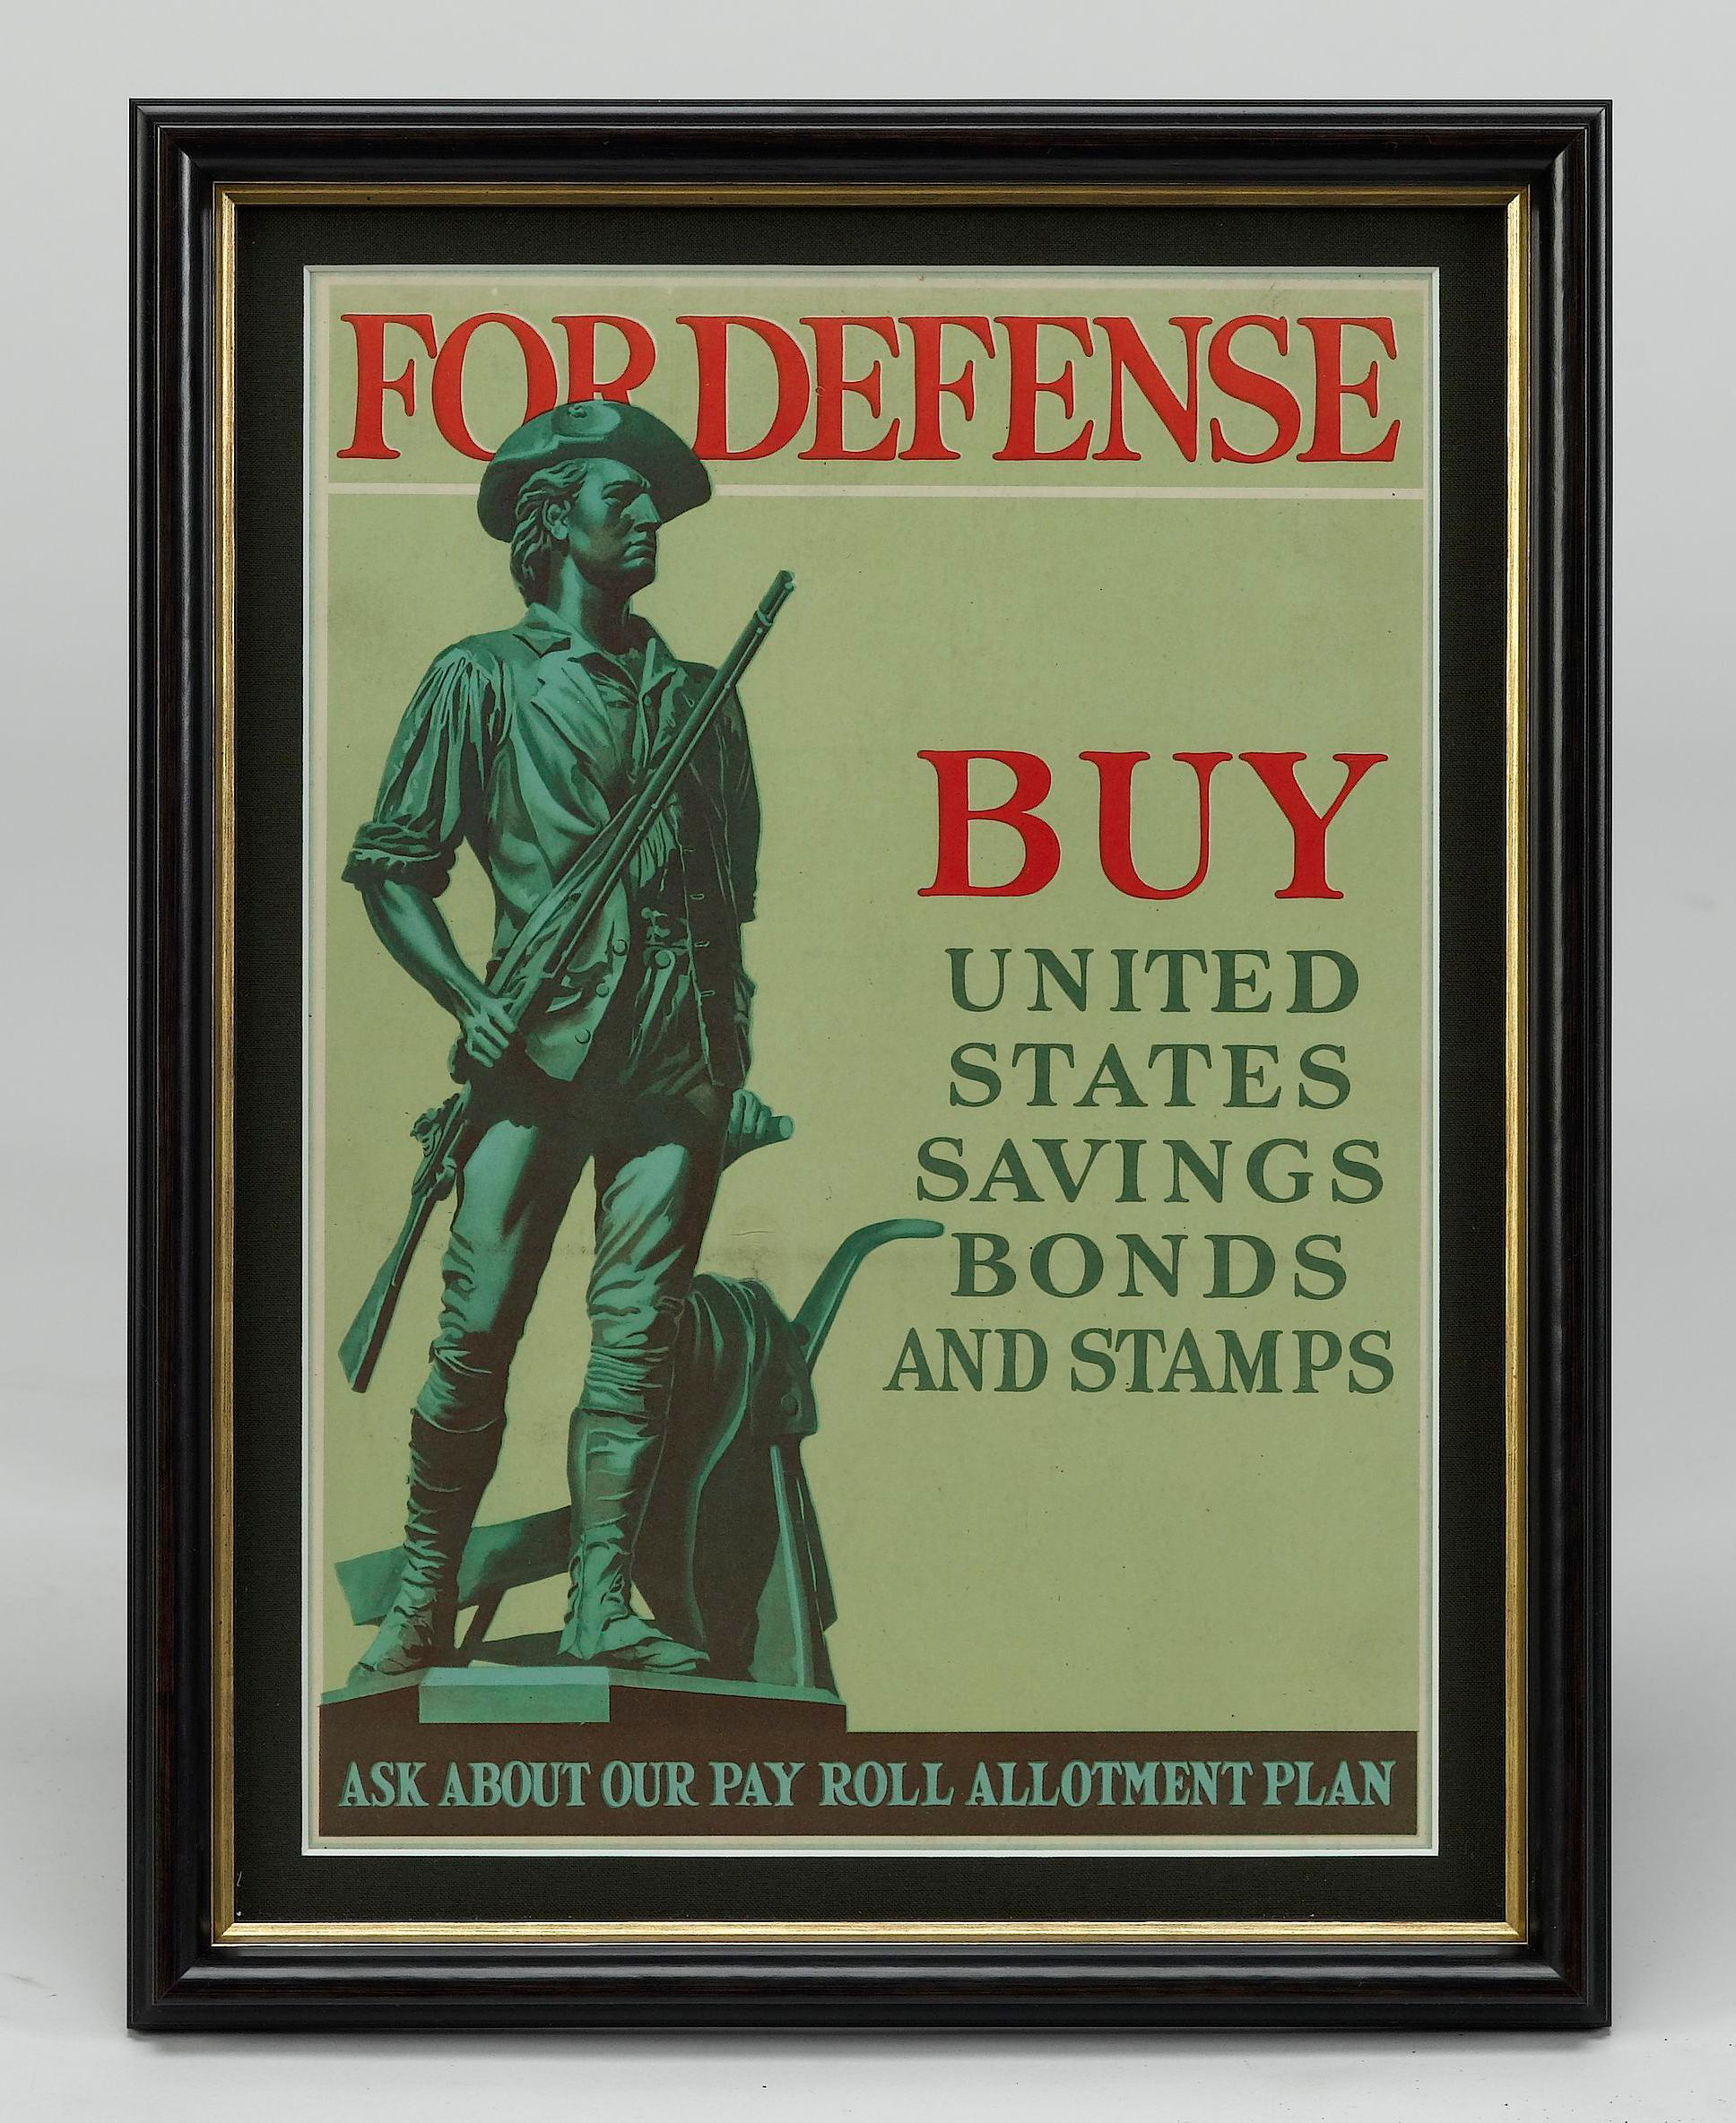 This is a vintage savings bond poster from WWII, dating to 1941. The poster reads 